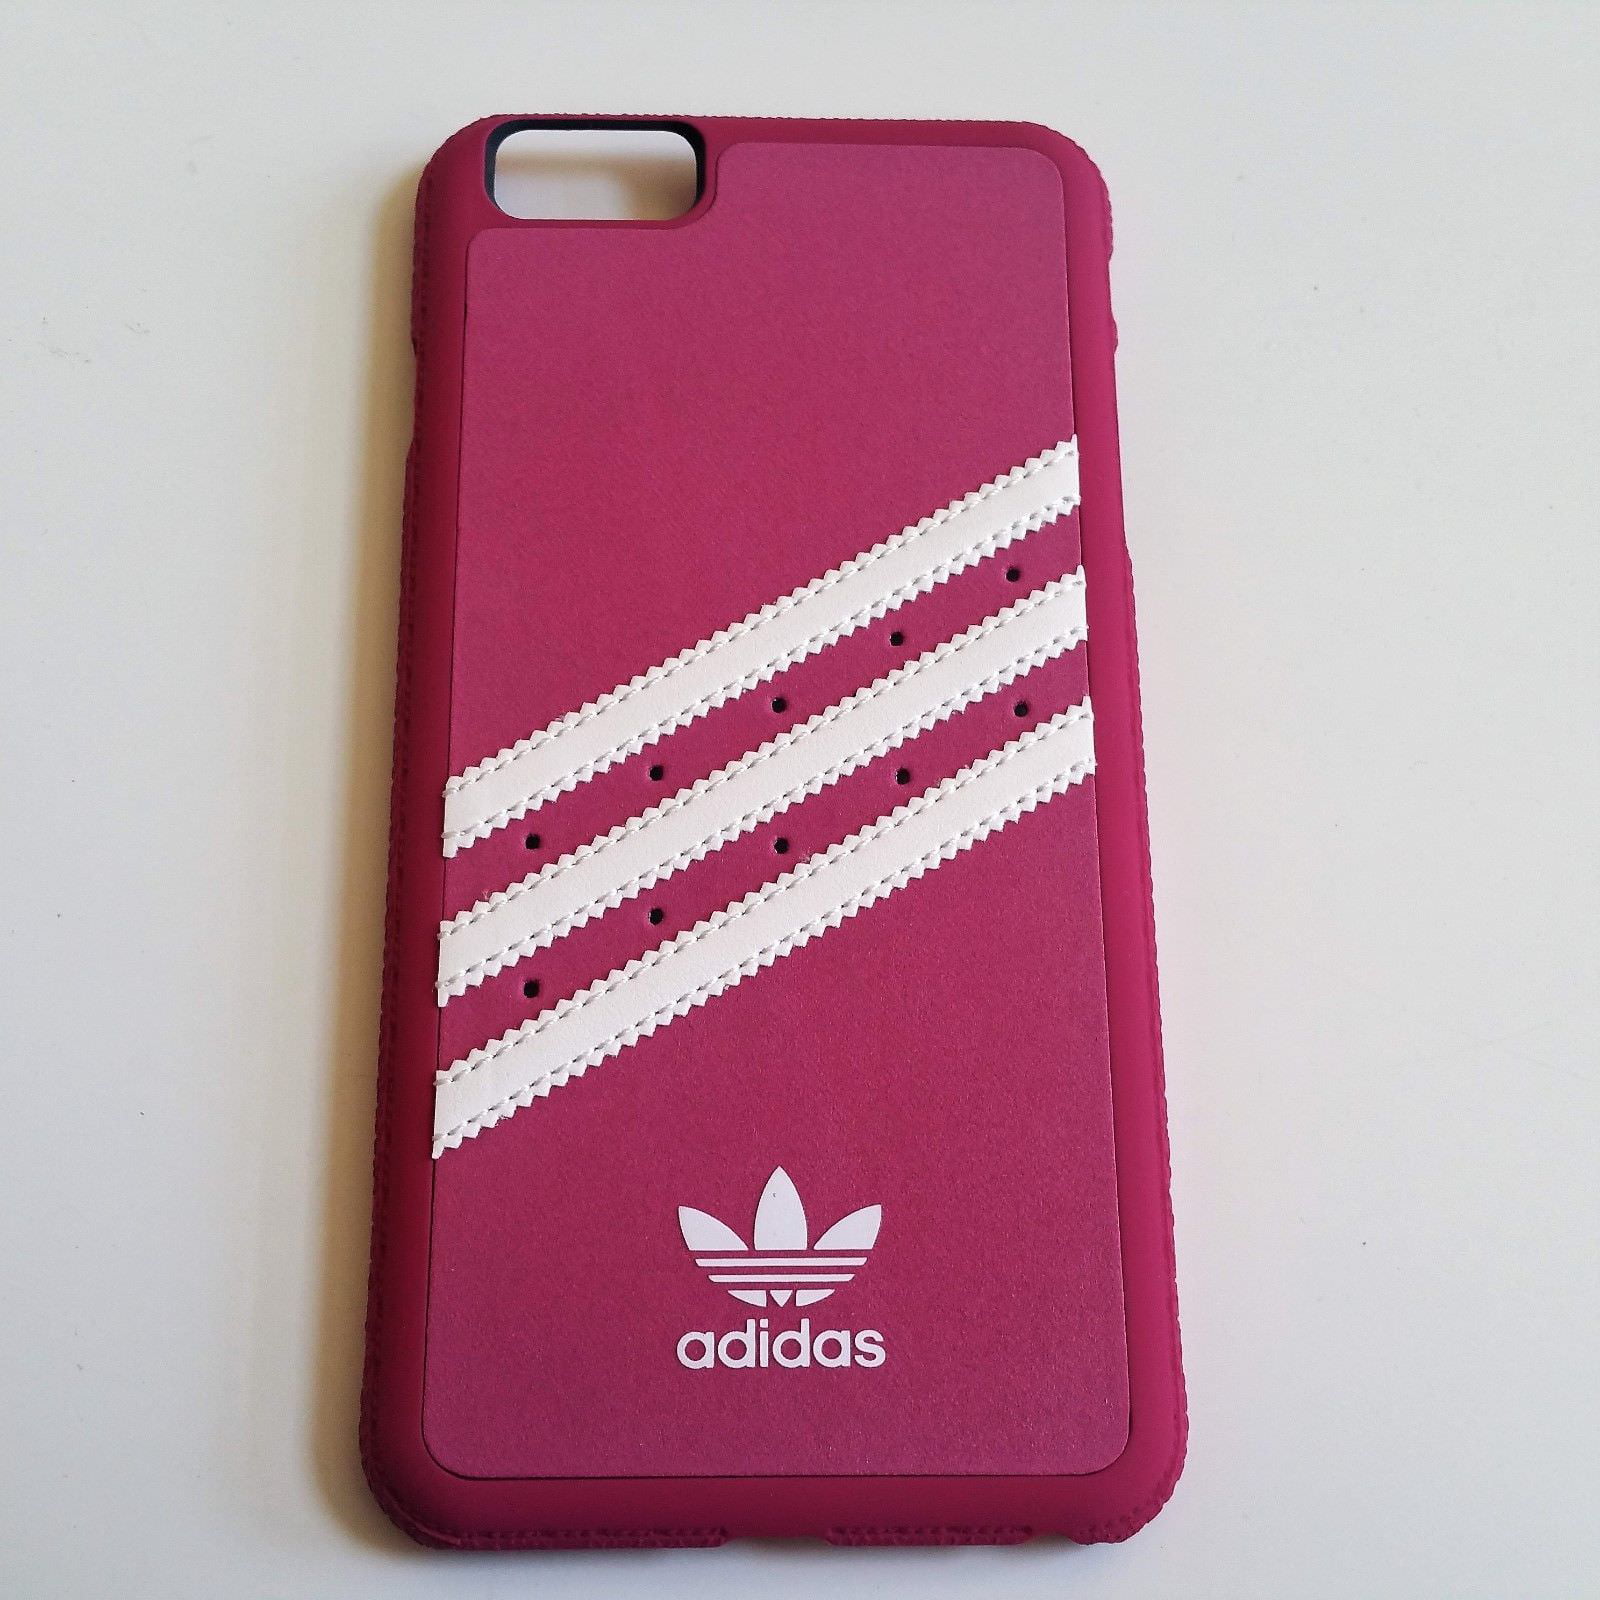 Adidas Suede Molded iPhone 6 Plus Pink & White - Walmart.com